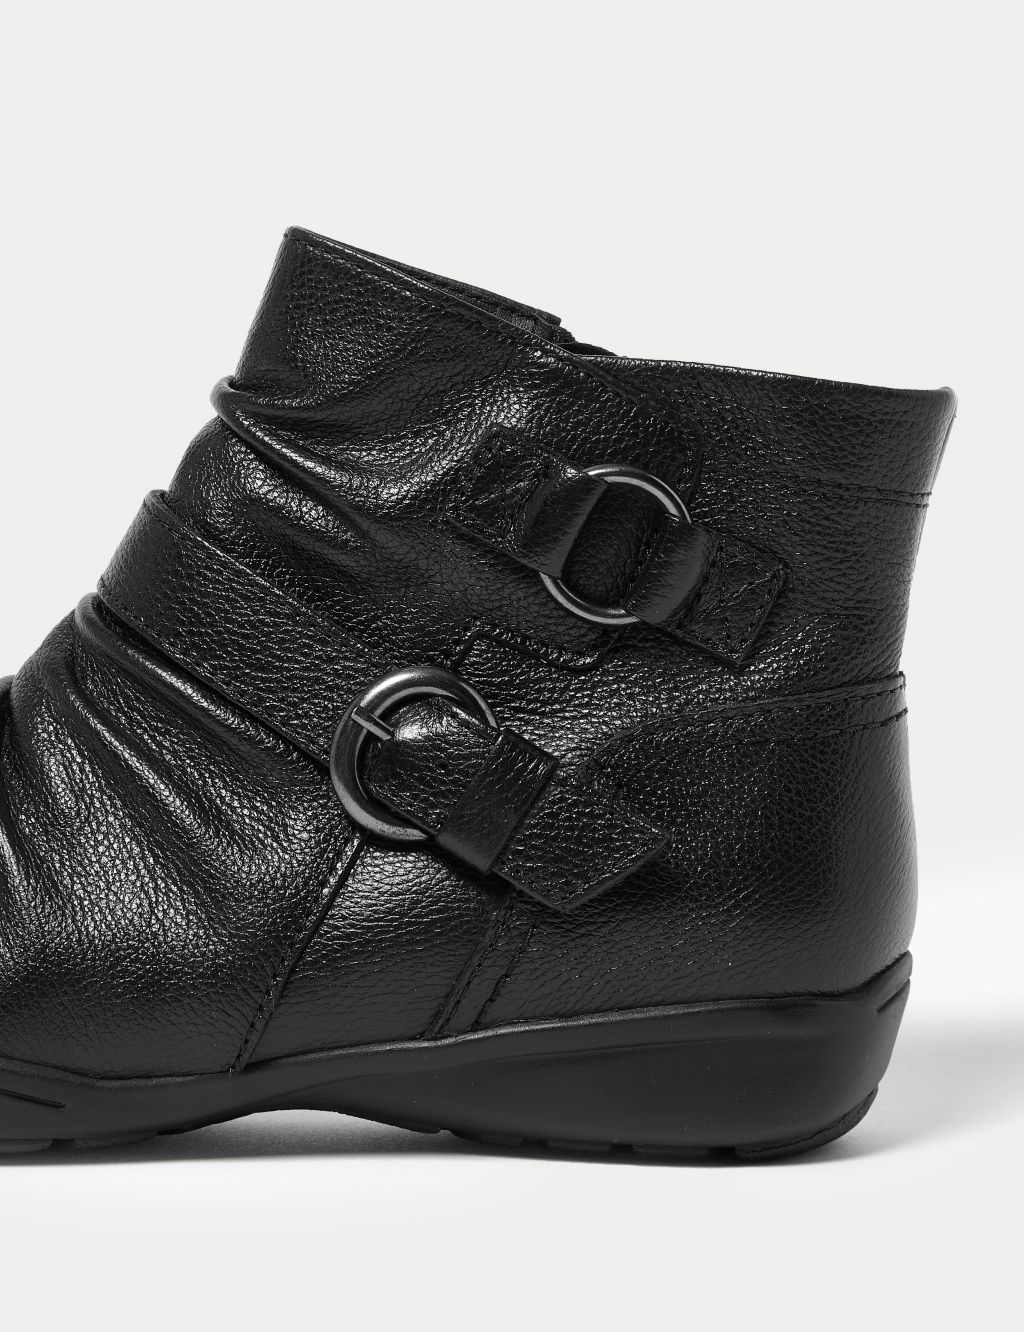 Wide Fit Leather Buckle Ruched Ankle Boots image 4